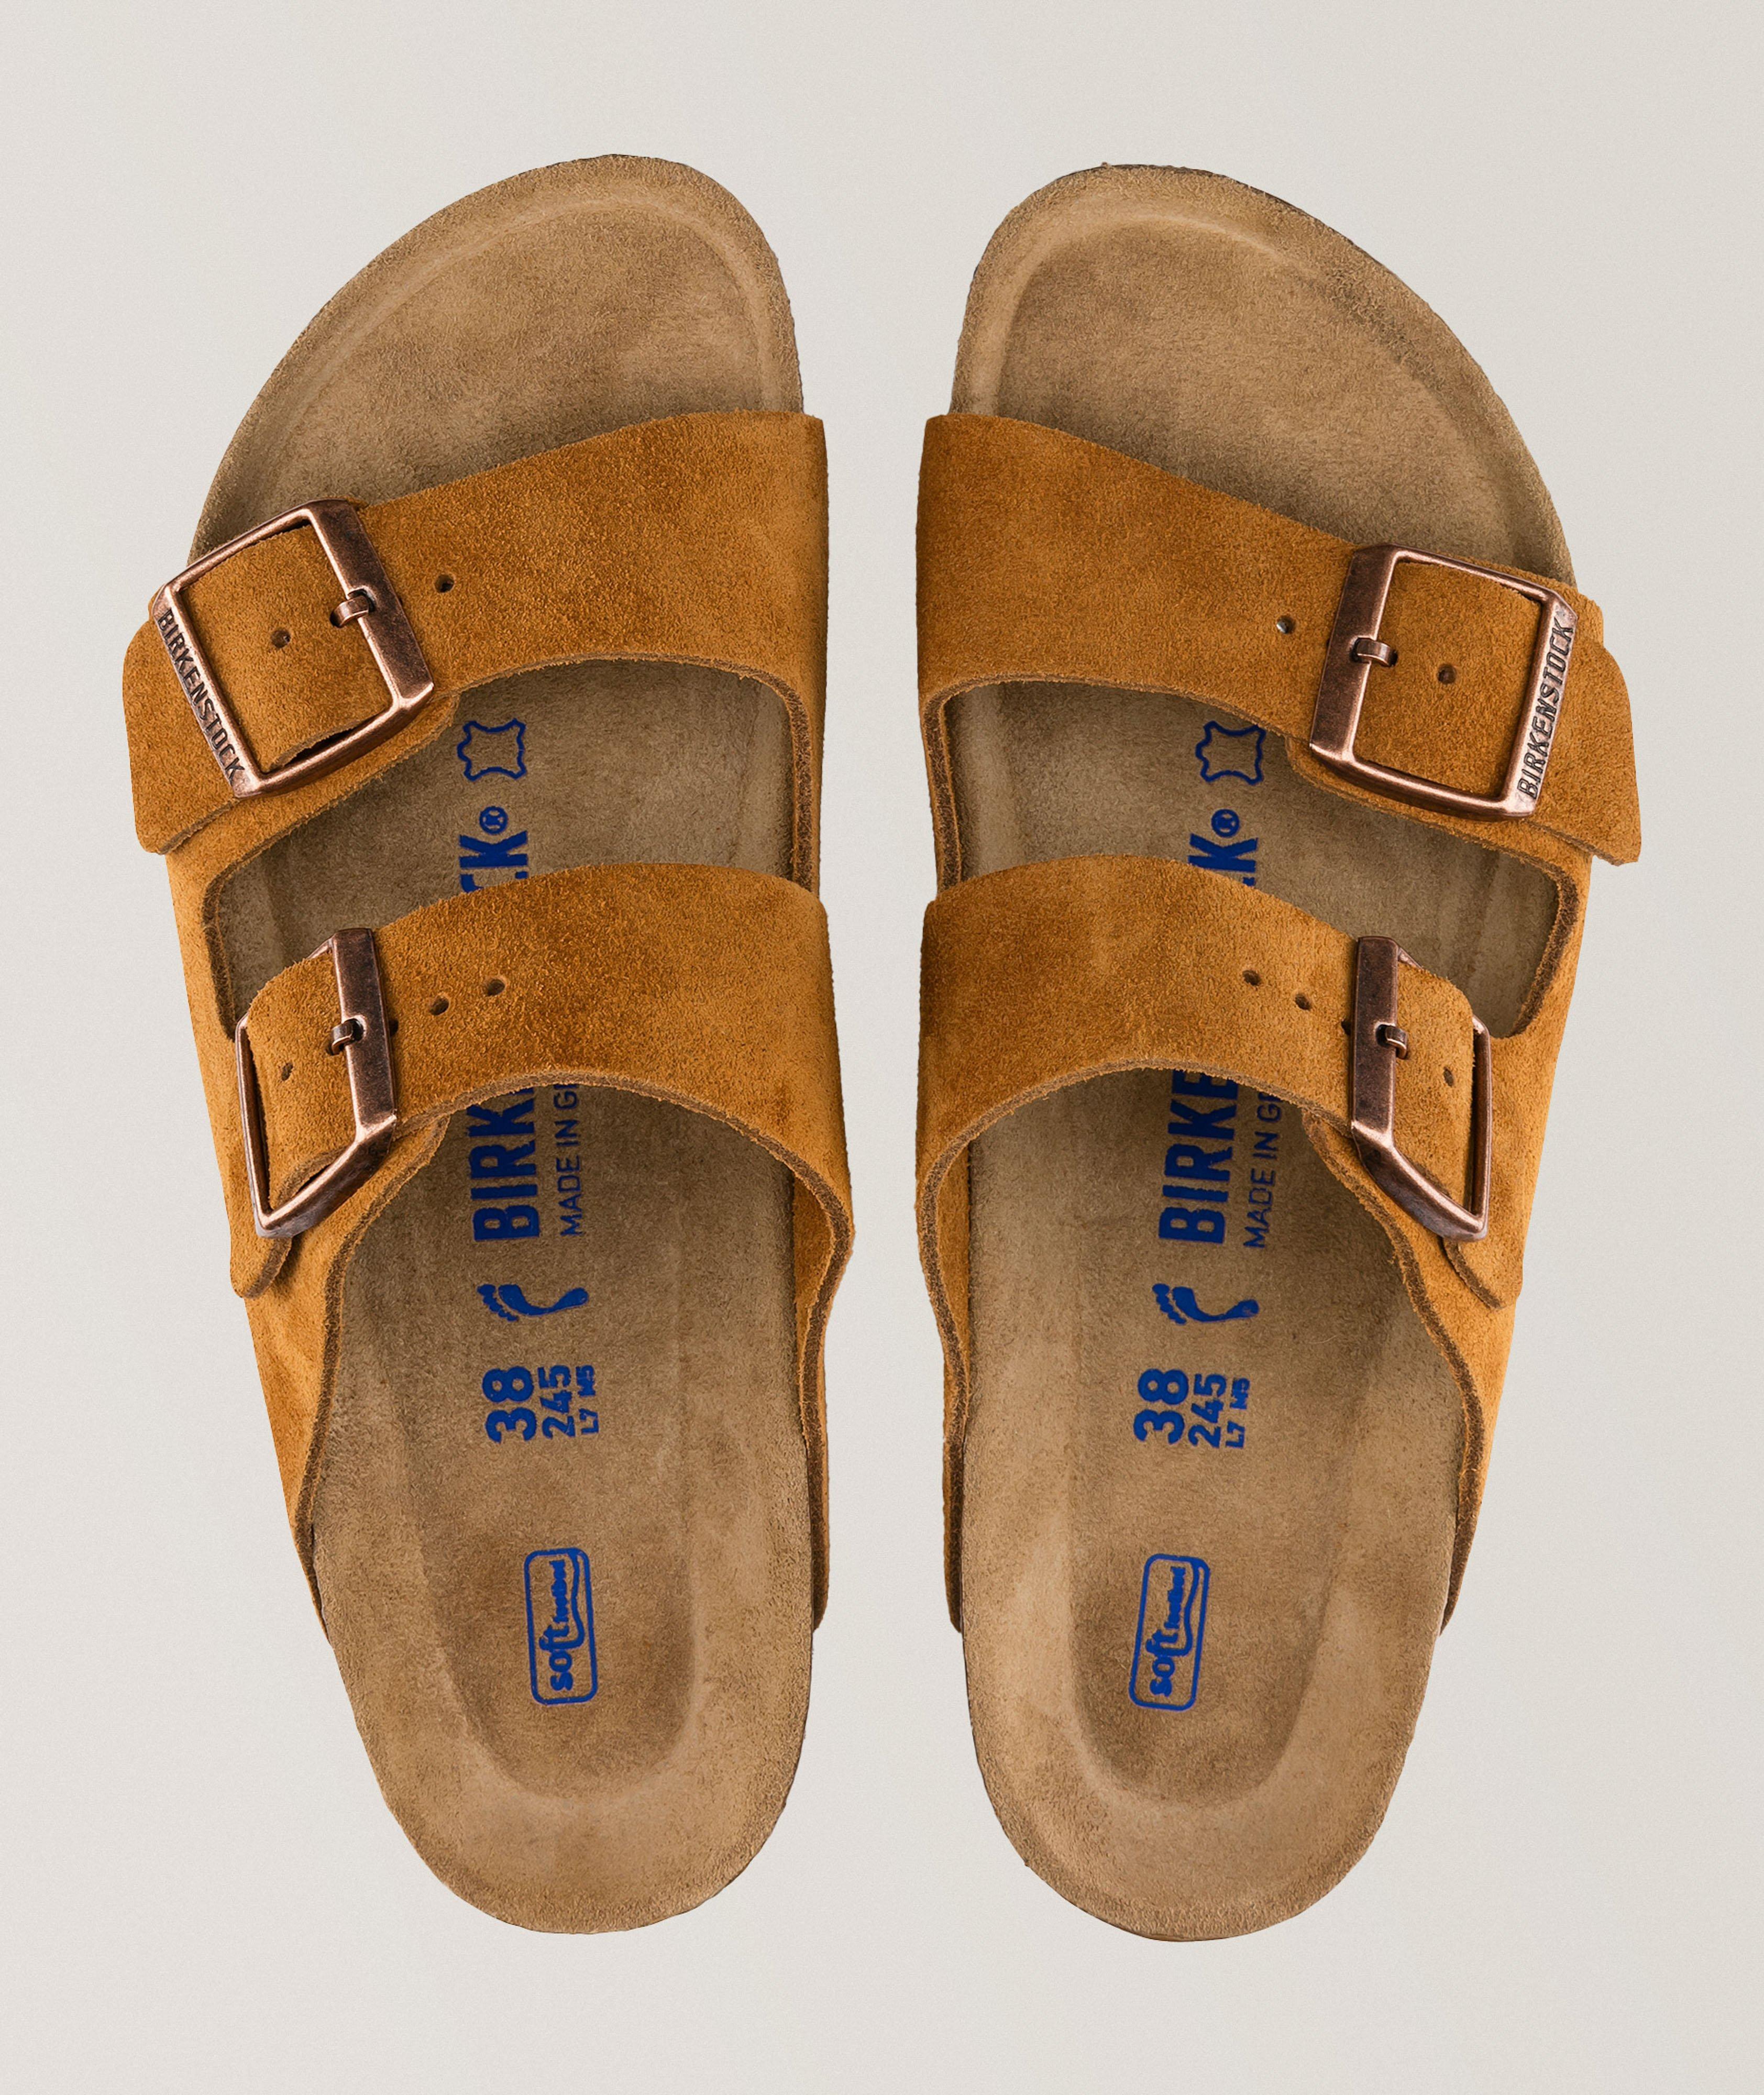 Arizona Suede Soft Footbed Sandals